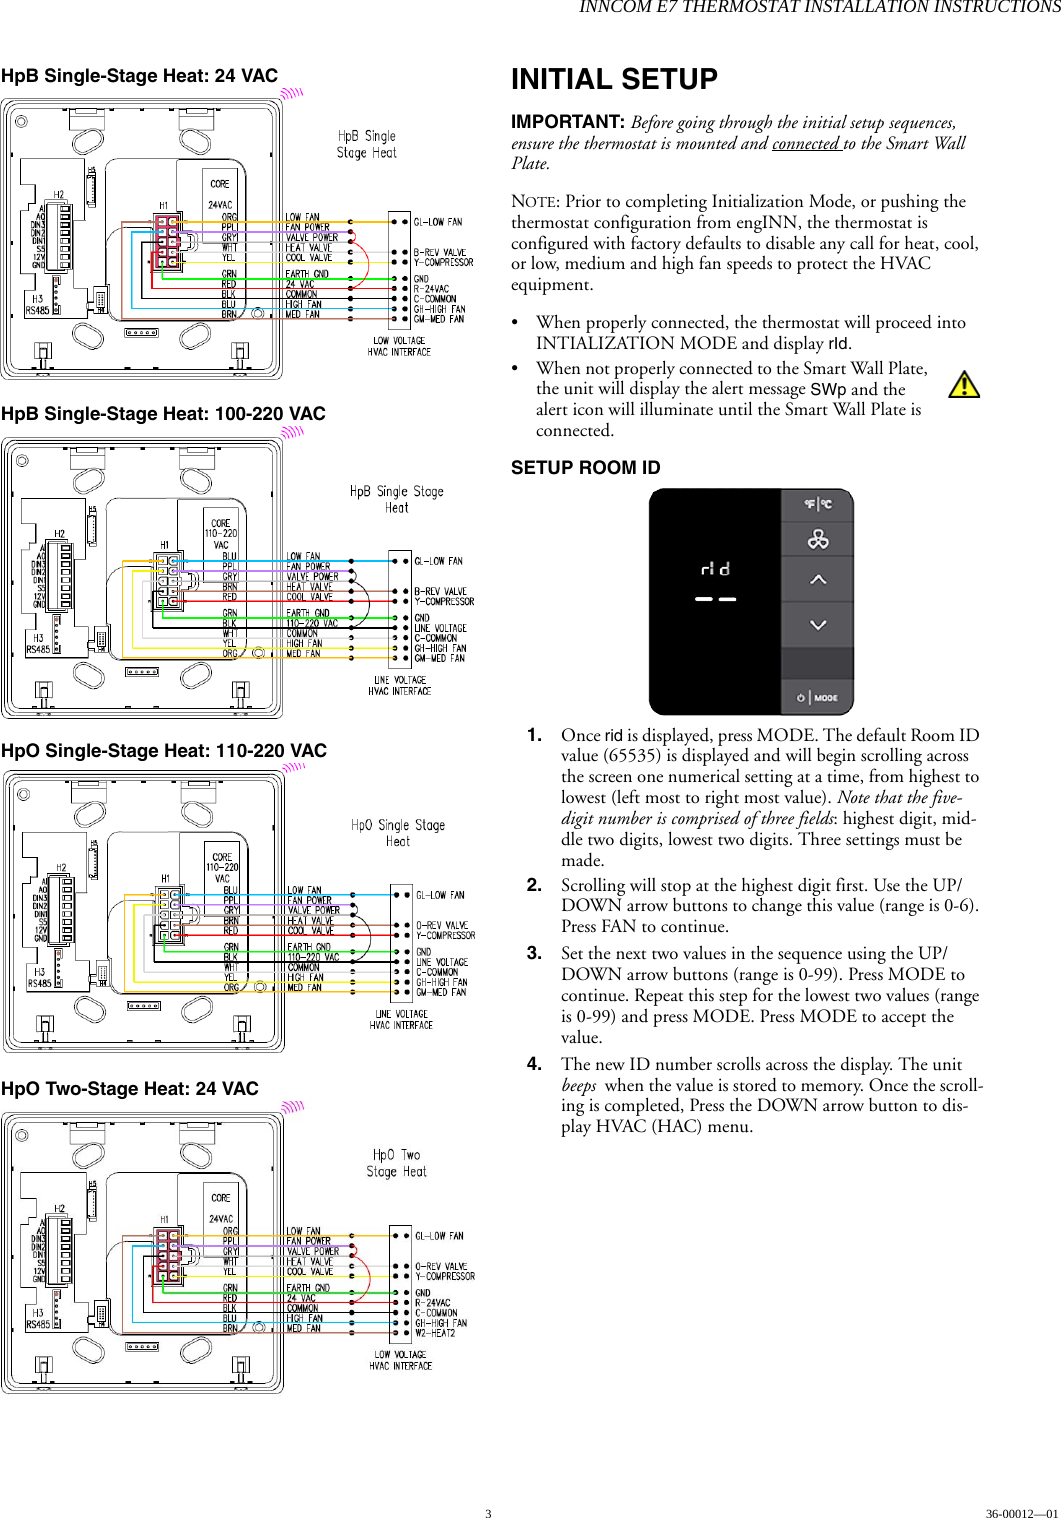 INNCOM E7 THERMOSTAT INSTALLATION INSTRUCTIONS336-00012—01HpB Single-Stage Heat: 24 VAC HpB Single-Stage Heat: 100-220 VAC HpO Single-Stage Heat: 110-220 VAC HpO Two-Stage Heat: 24 VAC INITIAL SETUPIMPORTANT: Before going through the initial setup sequences, ensure the thermostat is mounted and connected to the Smart Wall Plate. NOTE: Prior to completing Initialization Mode, or pushing the thermostat configuration from engINN, the thermostat is configured with factory defaults to disable any call for heat, cool, or low, medium and high fan speeds to protect the HVAC equipment. • When properly connected, the thermostat will proceed into INTIALIZATION MODE and display rId. • When not properly connected to the Smart Wall Plate, the unit will display the alert message SWp and the alert icon will illuminate until the Smart Wall Plate is connected. SETUP ROOM ID  1. Once rid is displayed, press MODE. The default Room ID value (65535) is displayed and will begin scrolling across the screen one numerical setting at a time, from highest to lowest (left most to right most value). Note that the five-digit number is comprised of three fields: highest digit, mid-dle two digits, lowest two digits. Three settings must be made. 2. Scrolling will stop at the highest digit first. Use the UP/DOWN arrow buttons to change this value (range is 0-6). Press FAN to continue.3. Set the next two values in the sequence using the UP/DOWN arrow buttons (range is 0-99). Press MODE to continue. Repeat this step for the lowest two values (range is 0-99) and press MODE. Press MODE to accept the value. 4. The new ID number scrolls across the display. The unit beeps  when the value is stored to memory. Once the scroll-ing is completed, Press the DOWN arrow button to dis-play HVAC (HAC) menu.